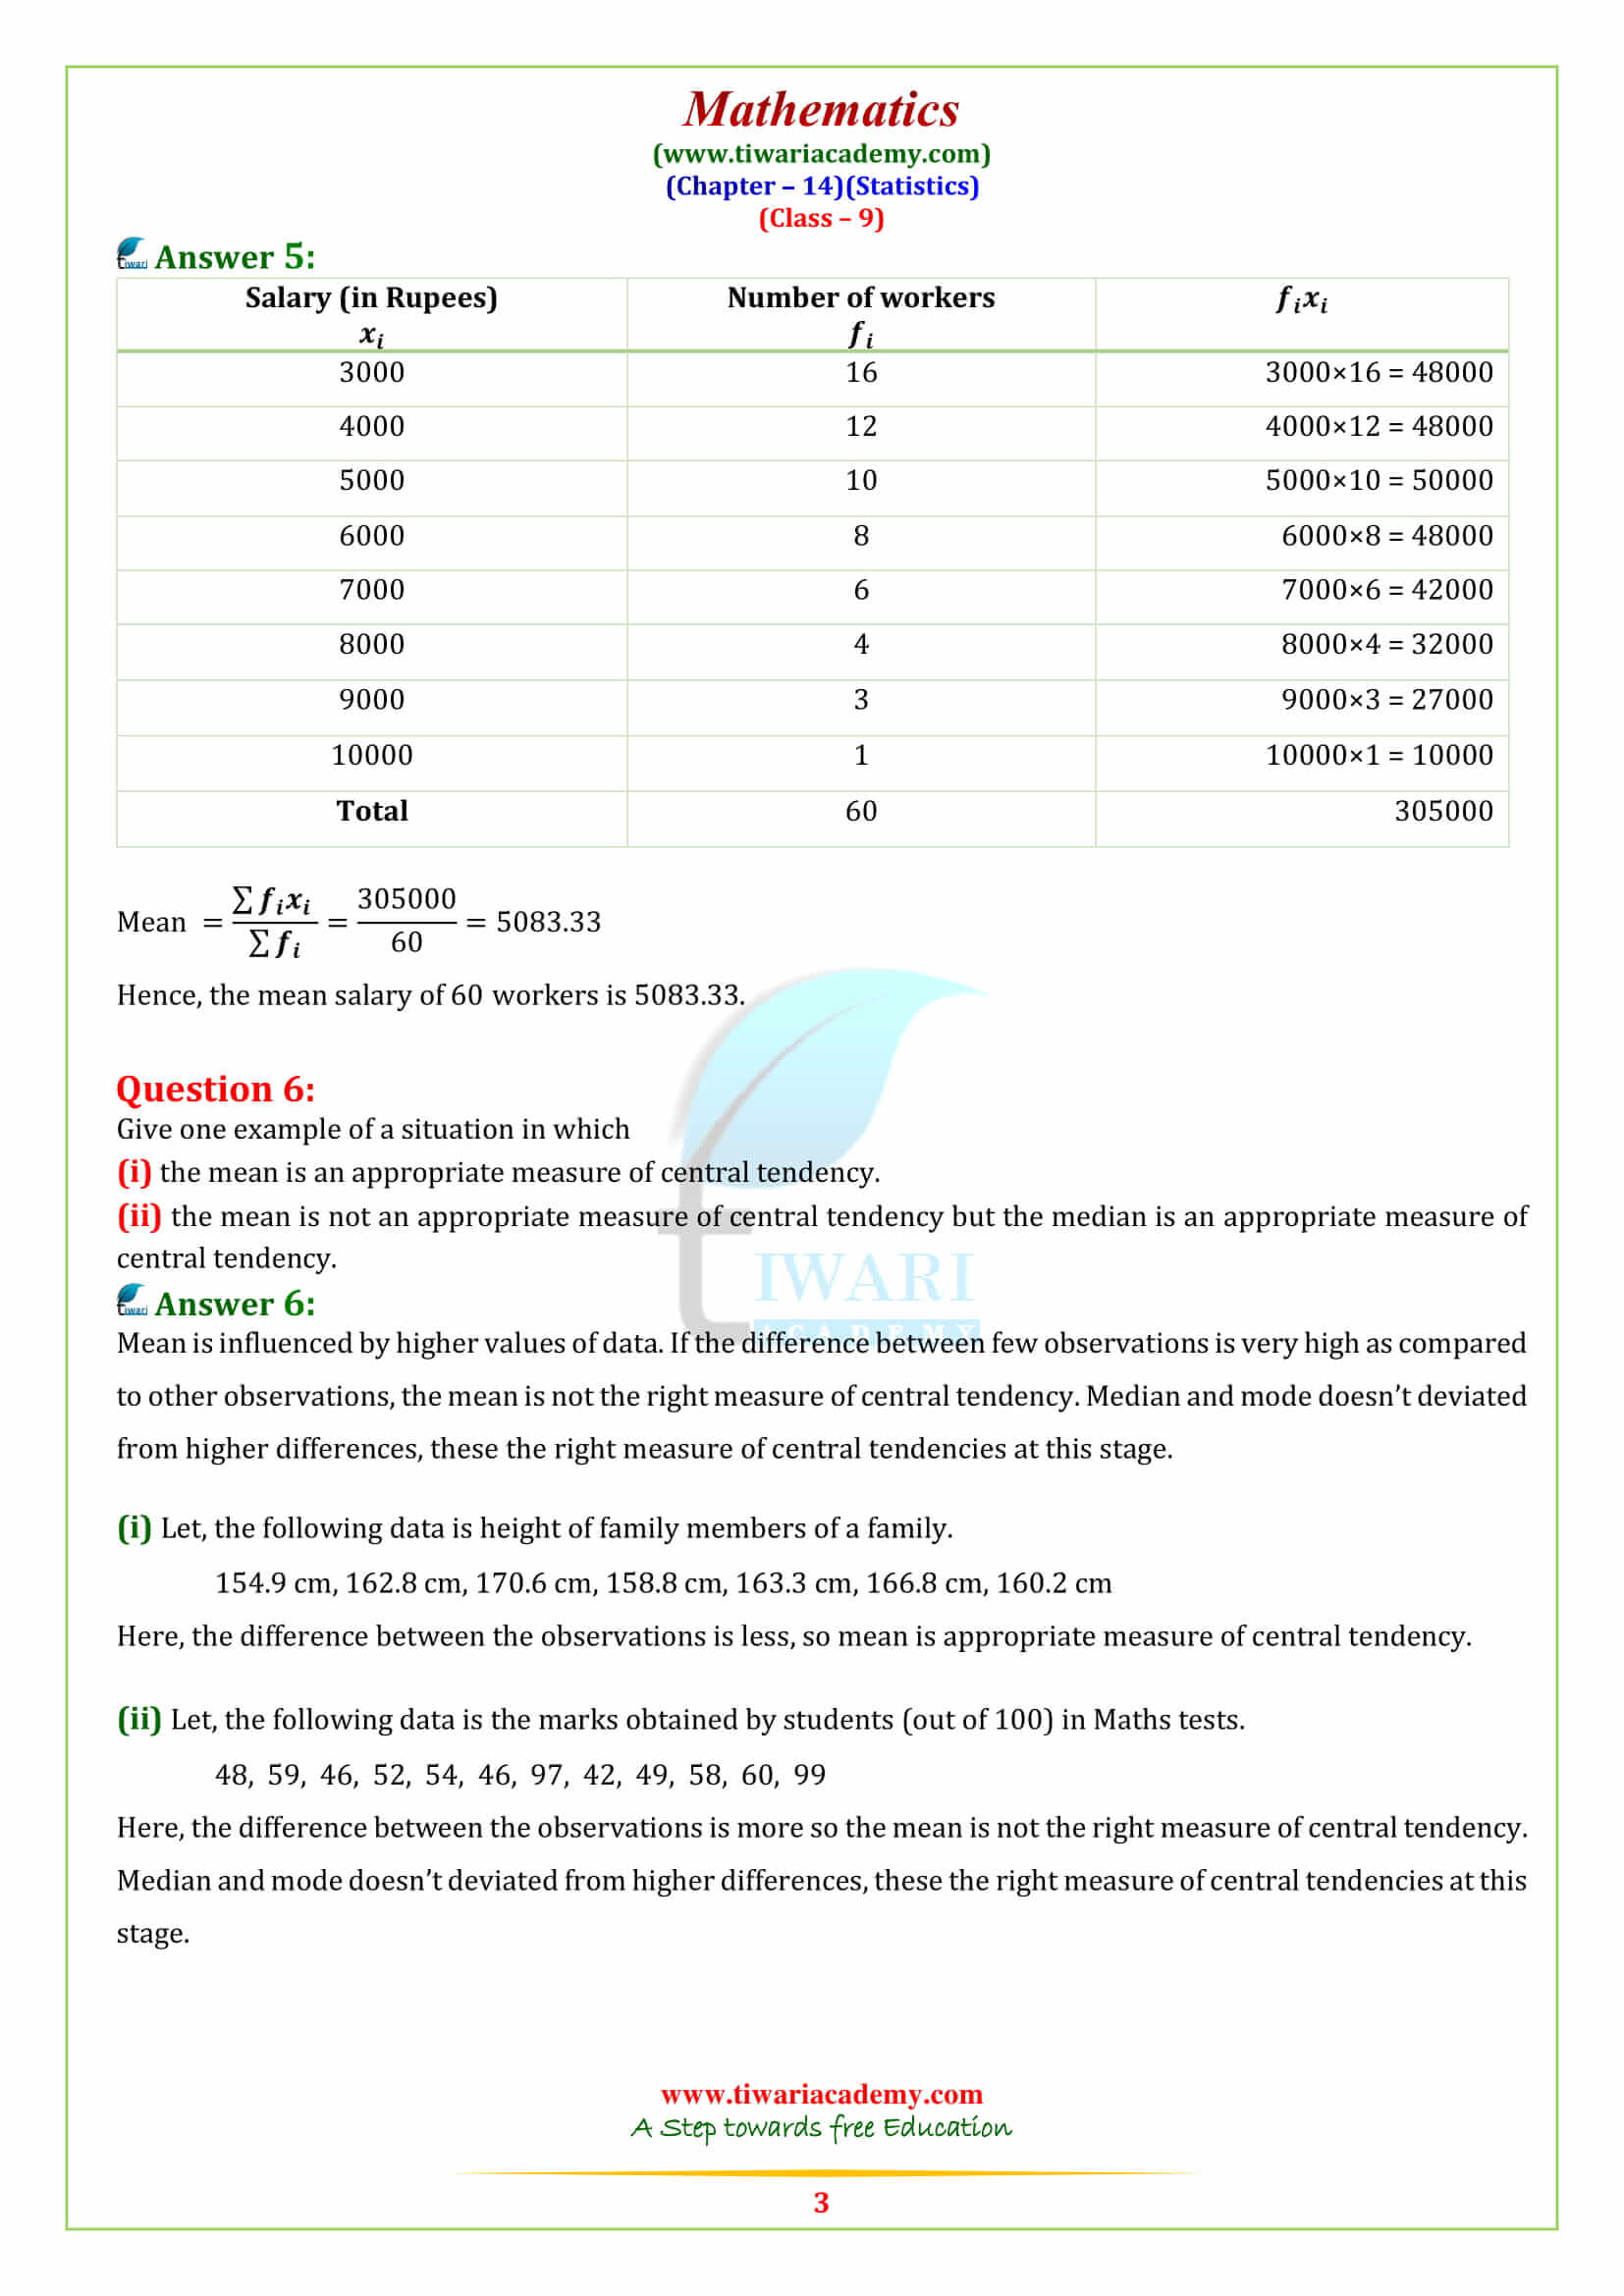 Class 9 Maths Chapter 14 Exercise 14.4 question 1, 2, 3, 4, 5, 6, 7, 8